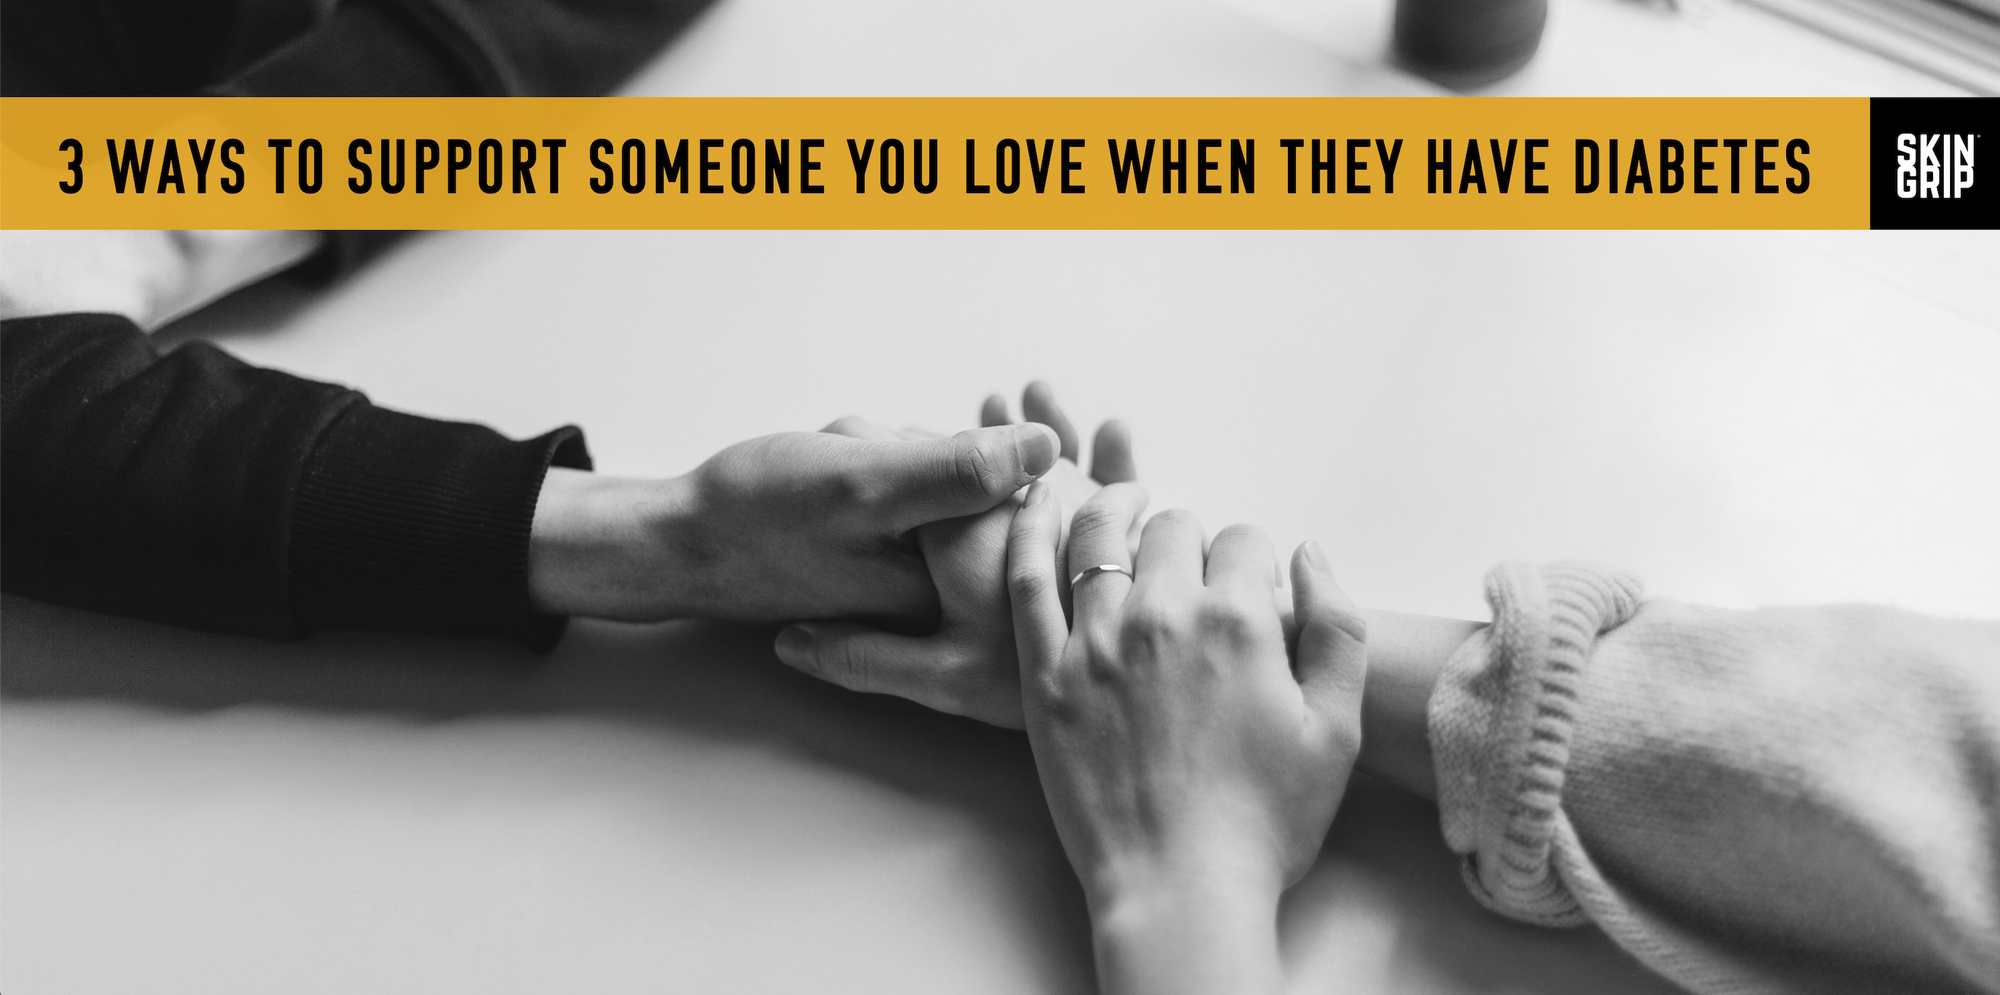 3 Ways to Support Someone You Love When They Have Diabetes 